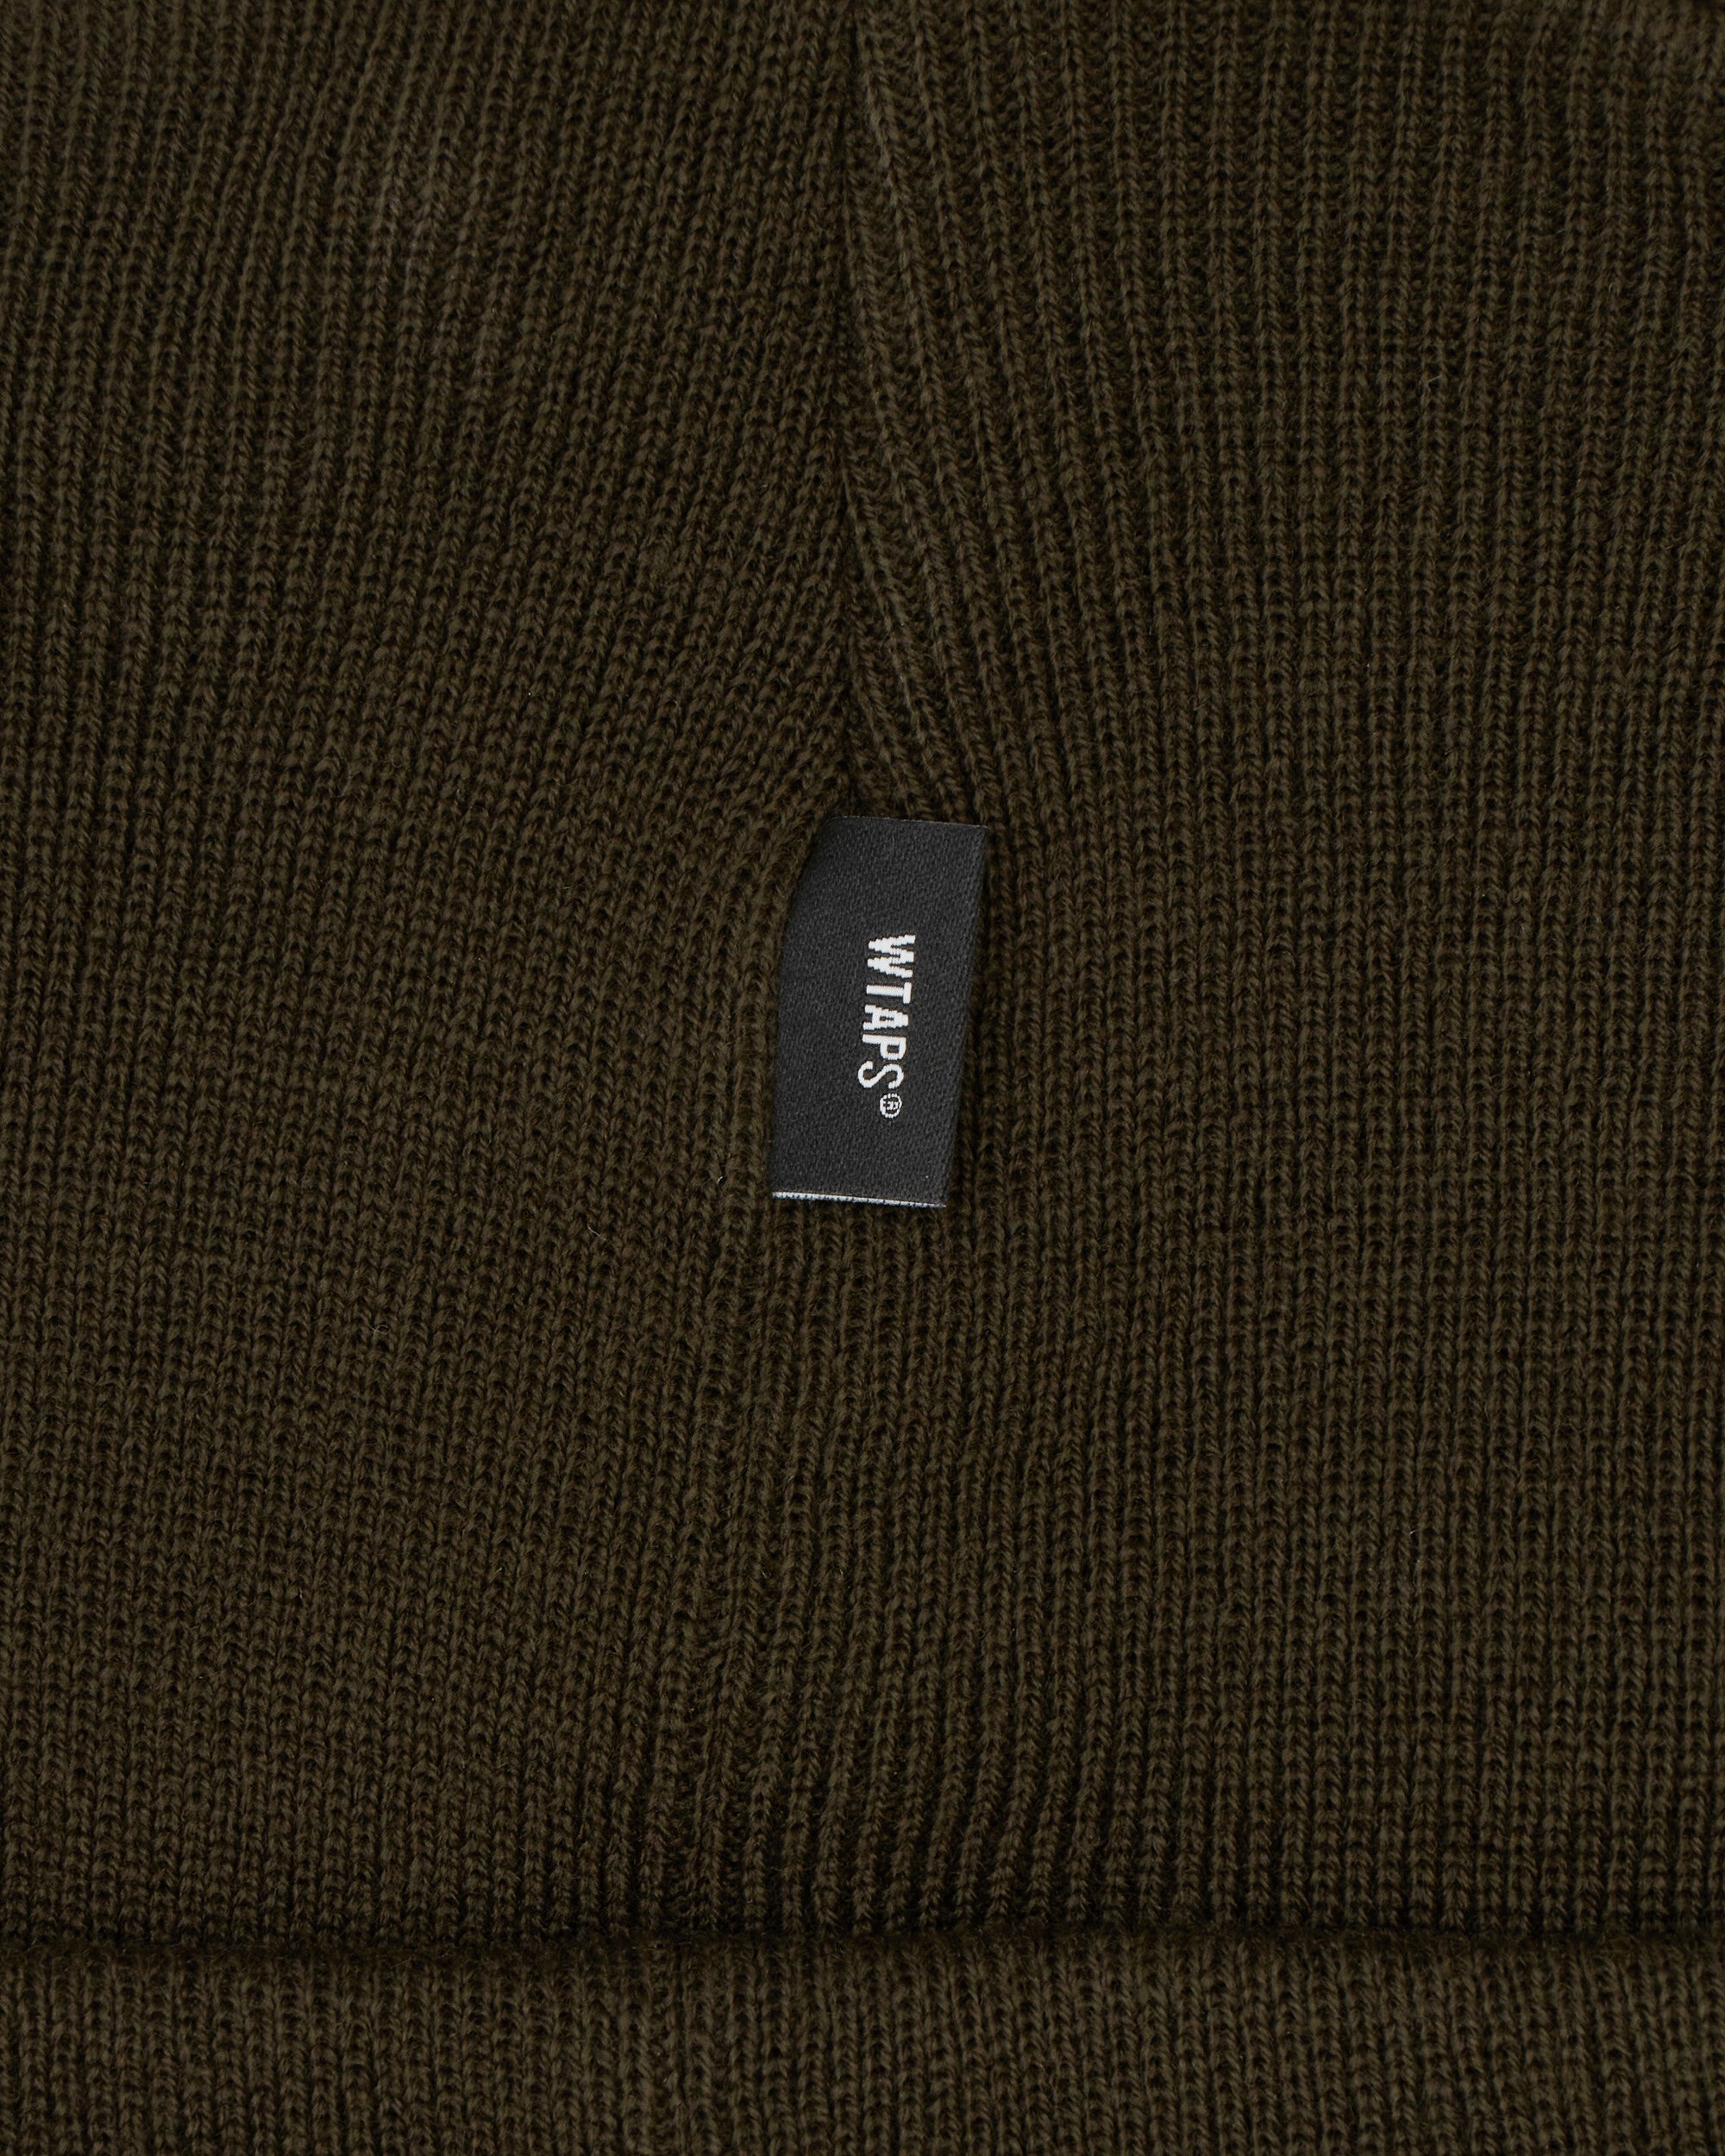 WTAPS Hat 25 Olive Drab Hats Beanies 232MADT-HT04 OD